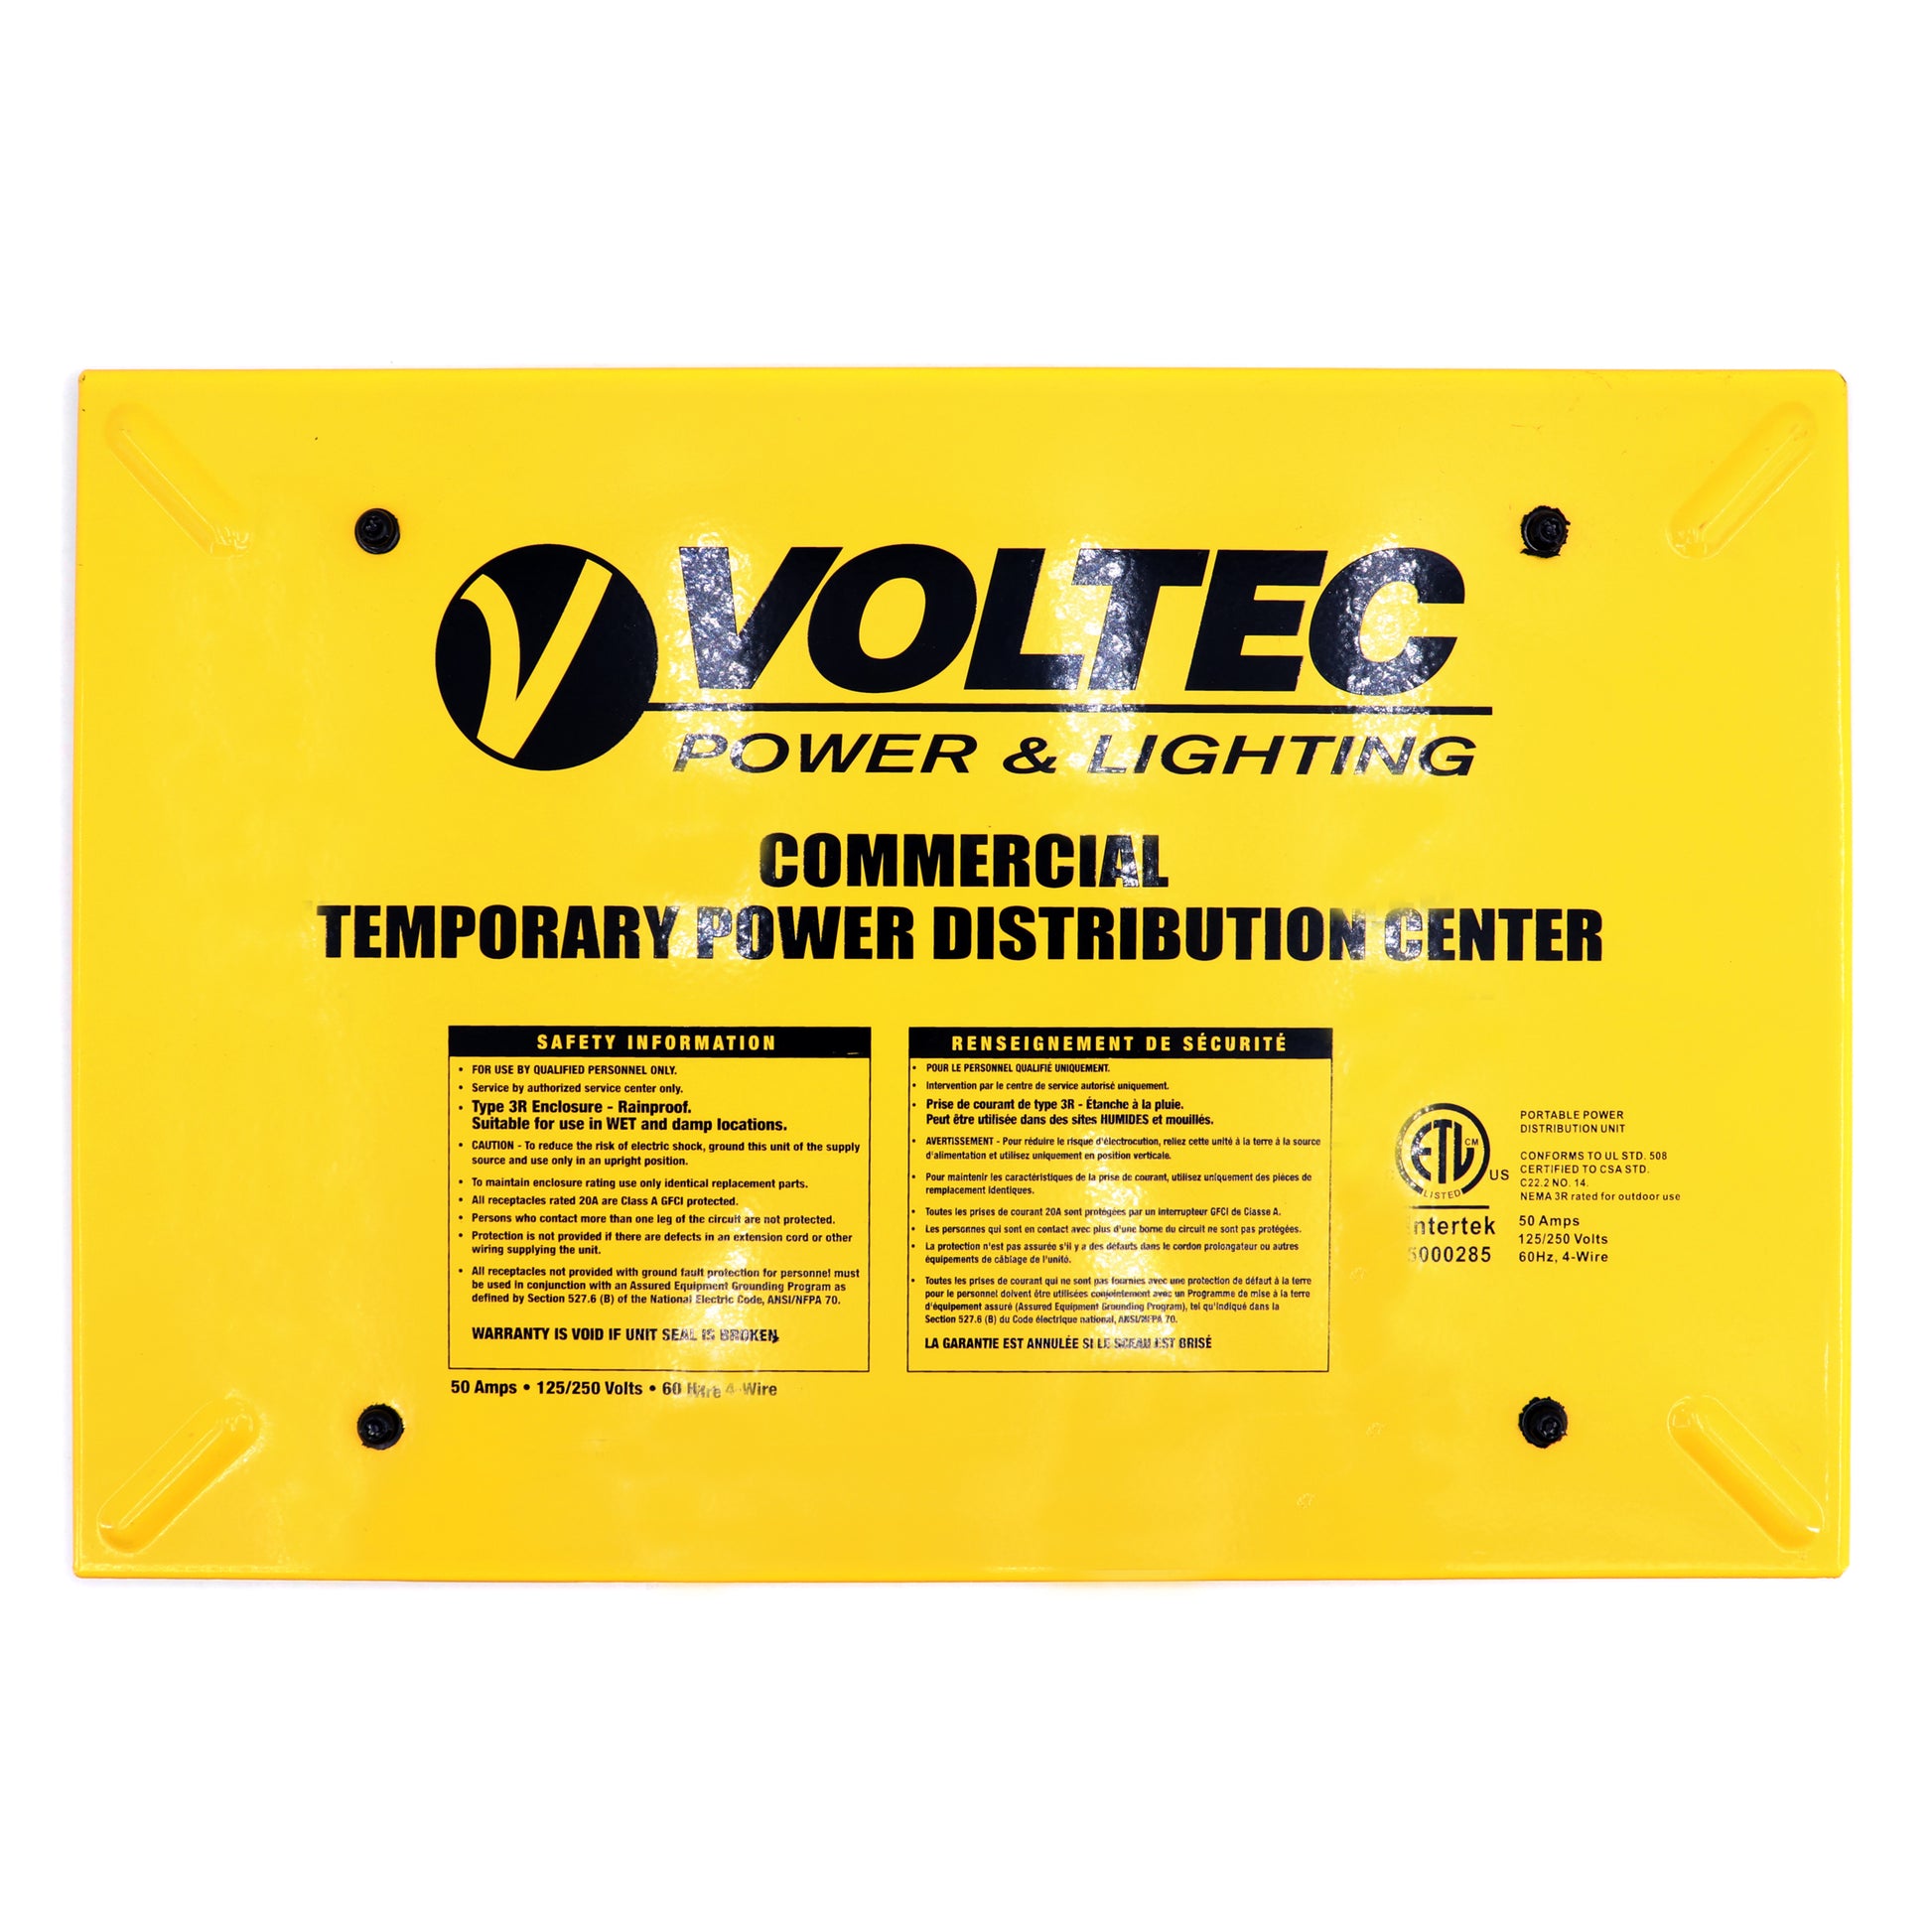 Voltec Power and Lighting